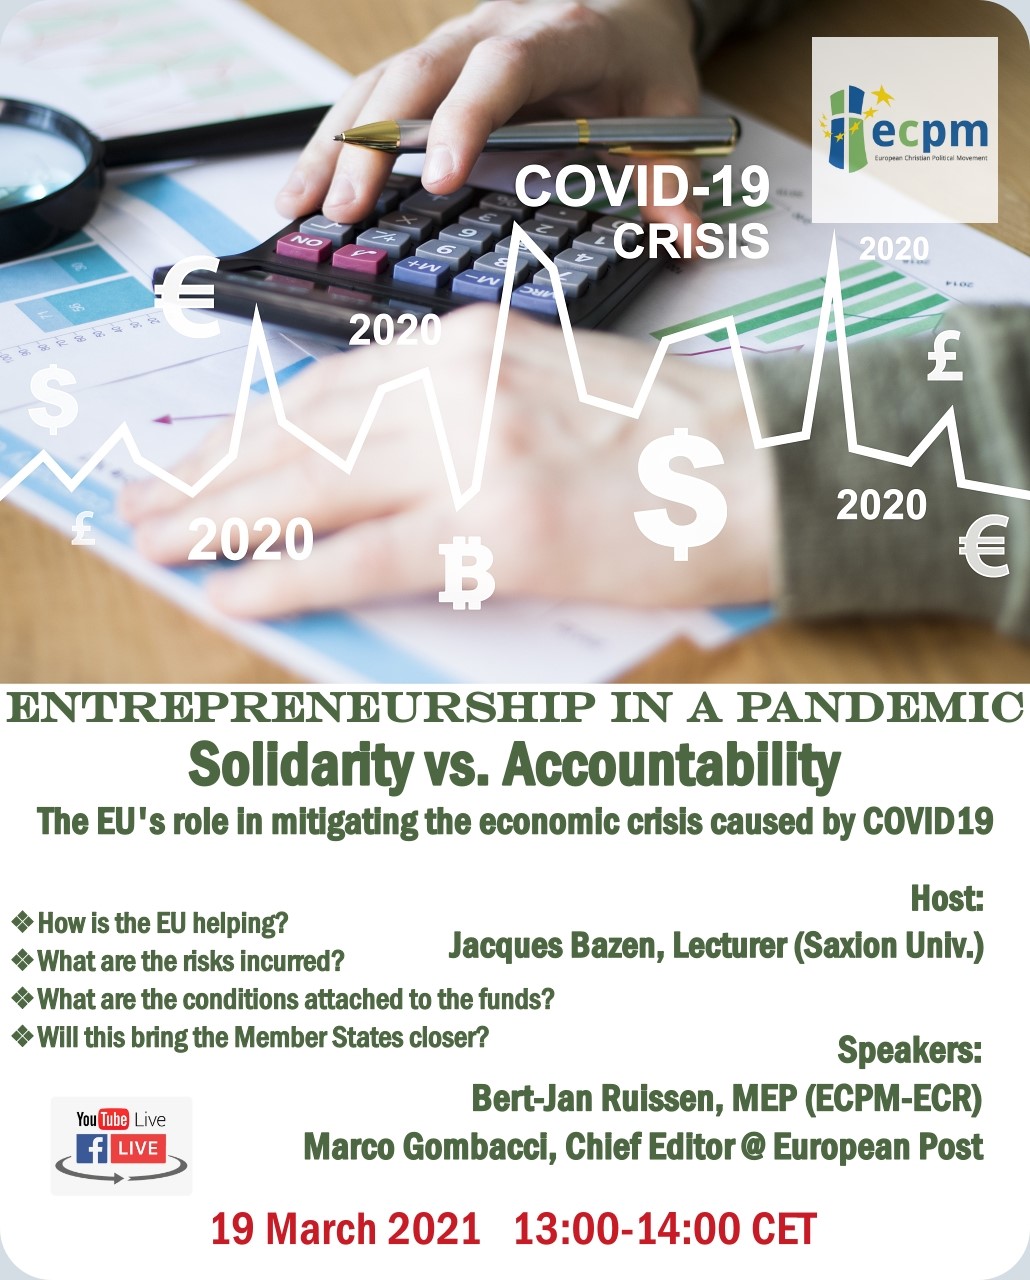 ENTREPRENEURSHIP IN A PANDEMIC. Solidarity vs. Accountability- EU's role in mitigating the economic crisis caused by COVID19